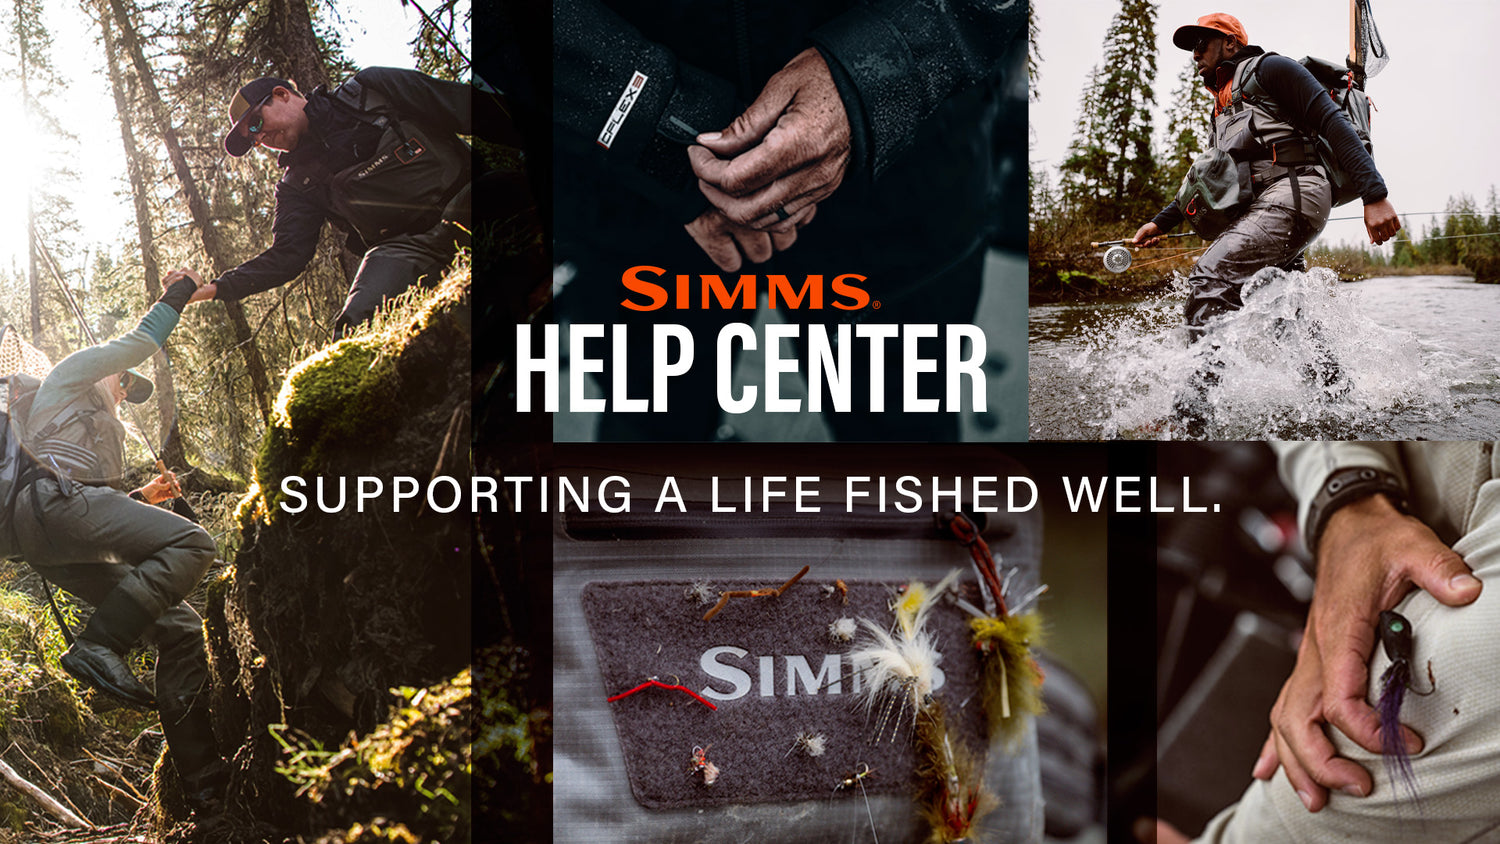 Simms Help Center Supporting A Life Fished Well